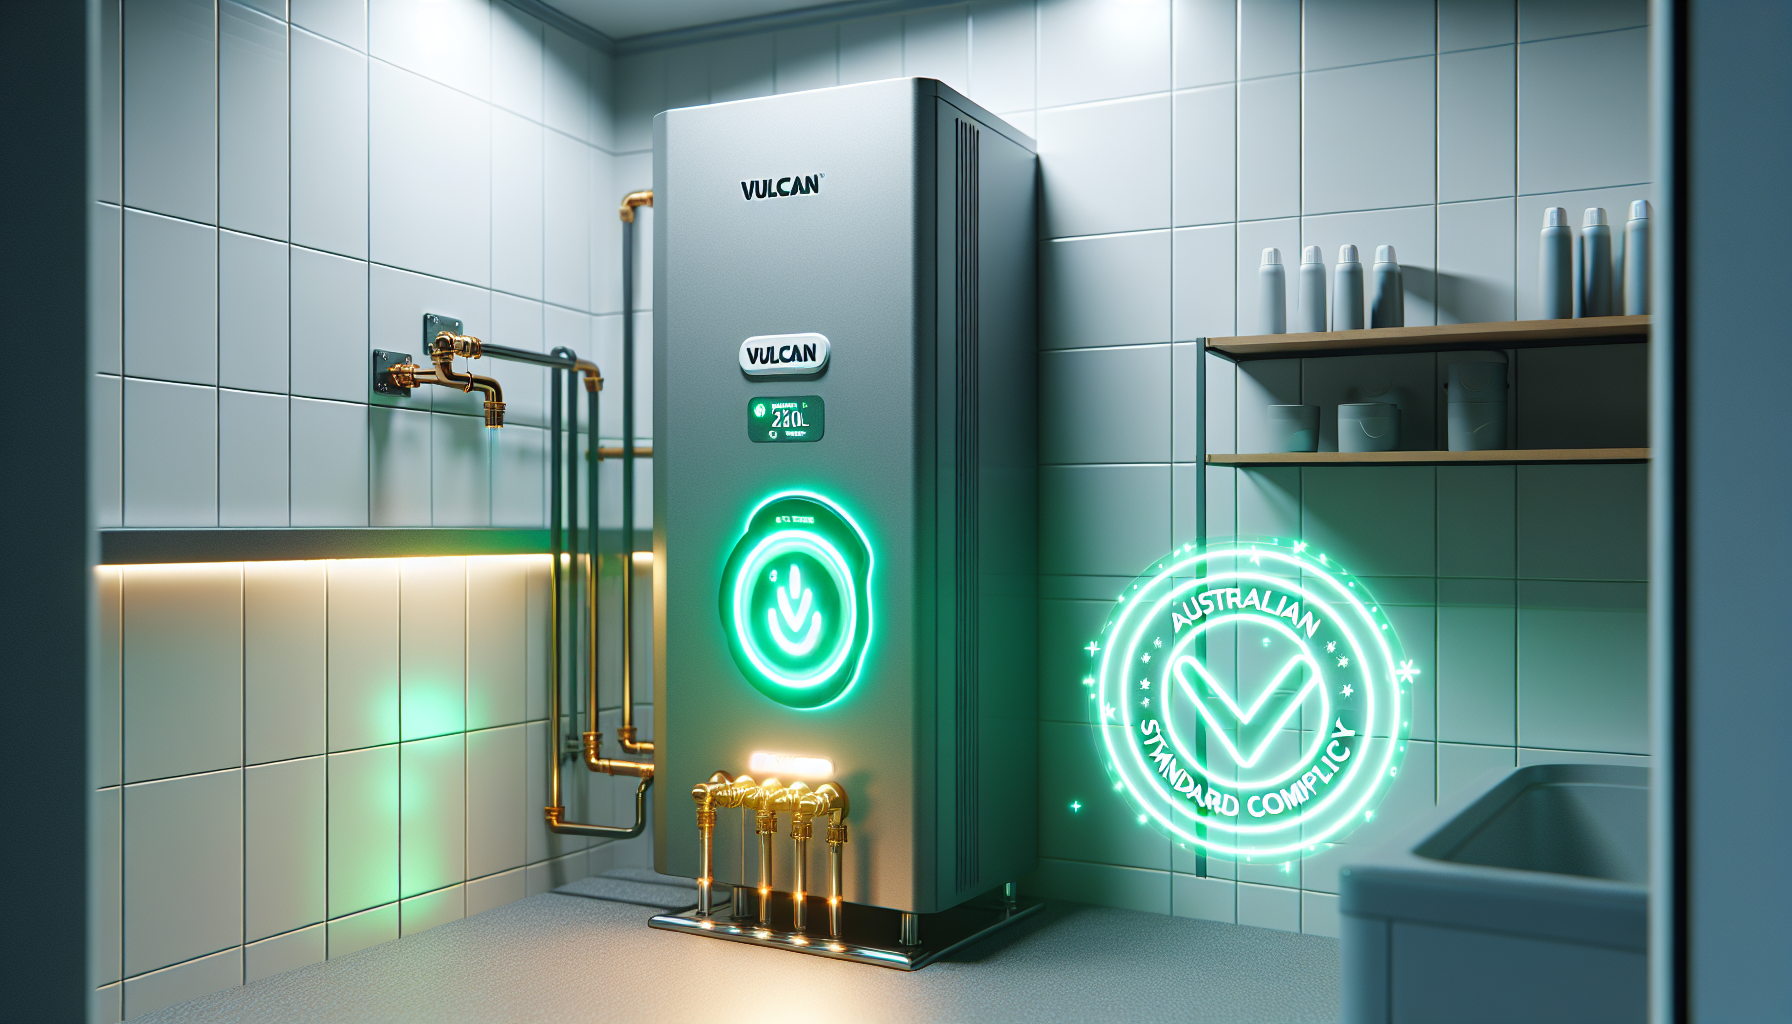 The energy-efficient and durable Vulcan 250L hot water system